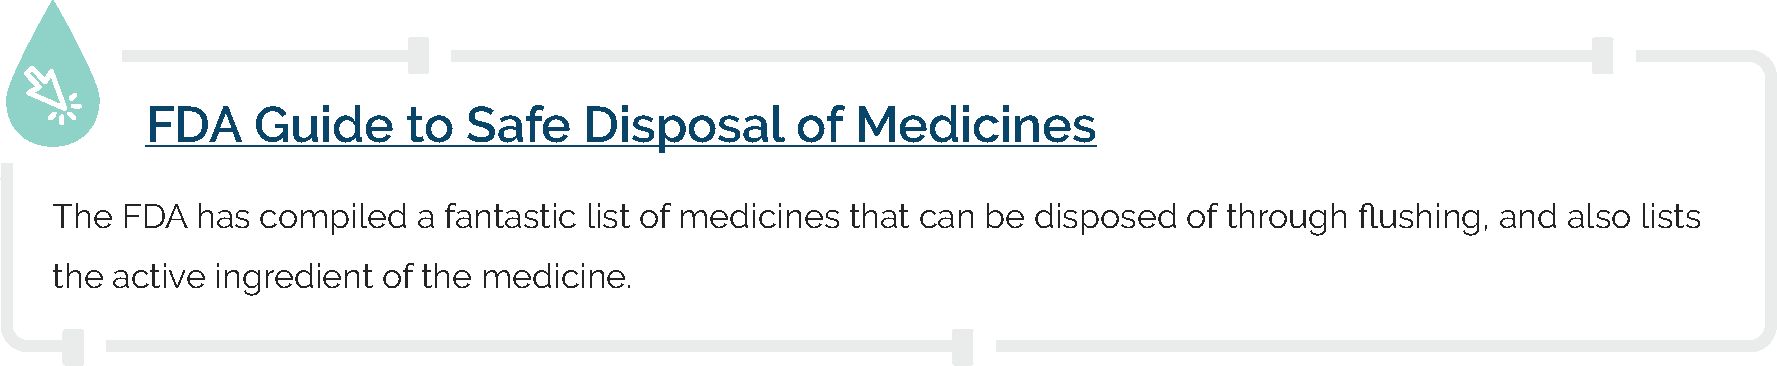 FDA Guide to Safe Disposal of Medicines